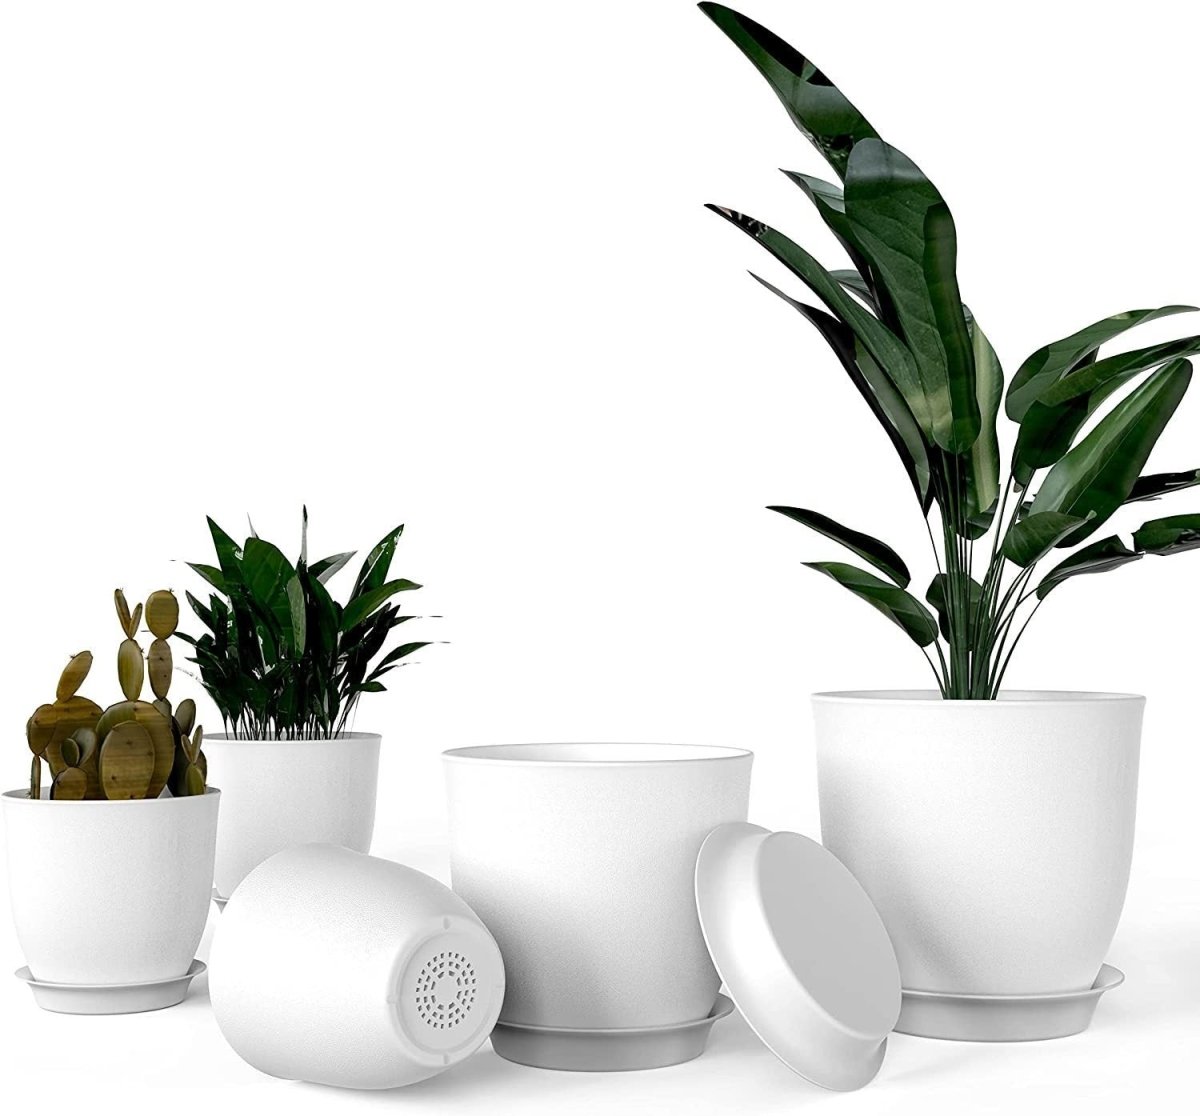 iPower Plastic Planter Pots 5 PCS Set 4.5-7.1 Inch Plant Pot Indoor Modern Decorative Nursery with Drainage Holes and Tray for All House Plants, Succulents, Flowers, Cactus or Seedling, White - SunSwill